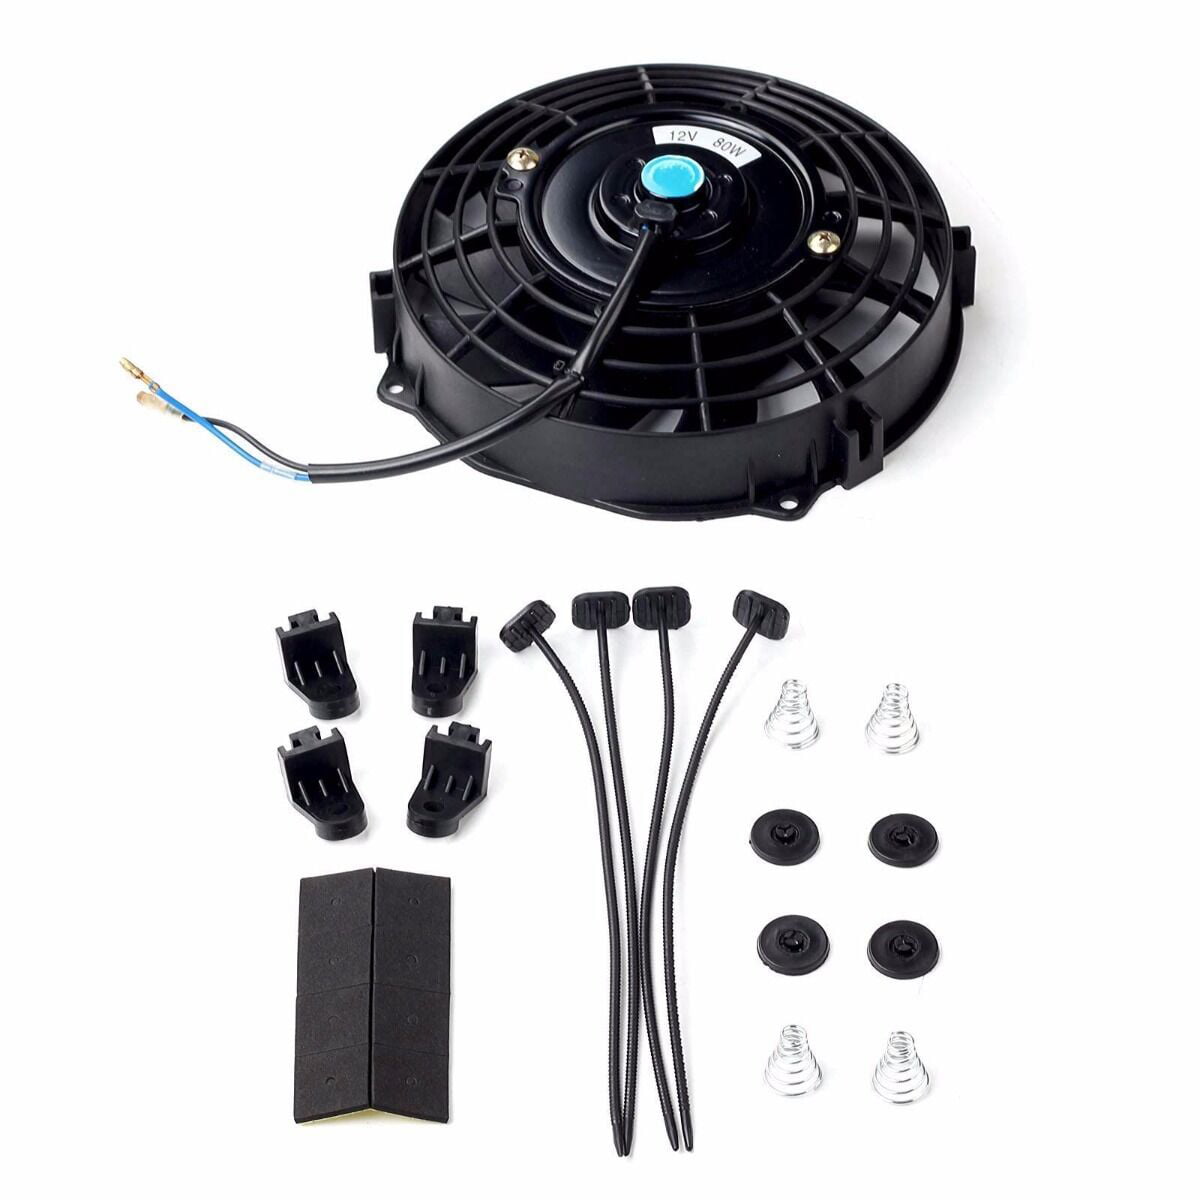 Thicknes：1.97 Ruien 7 Electric Radiator Cooling Fan Assembly Kit,12V 80W 700CFM Push/Pull Engine Fan Mounting Set Straight Blades for Automotive Car Truck 